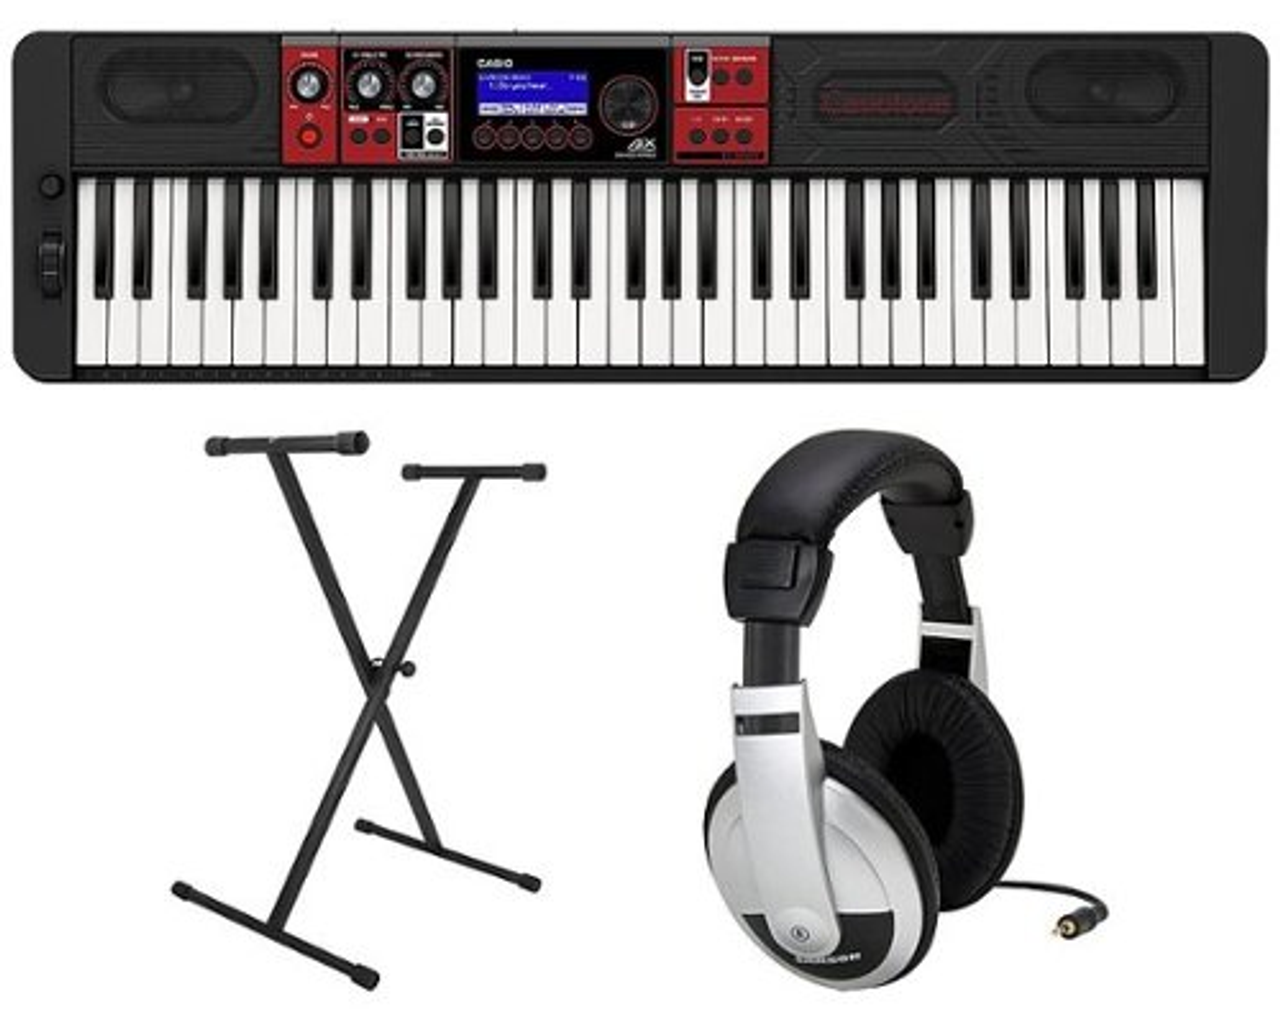 Casio CTS1000V Premium Pack with 61 Key Keyboard, Stand, AC Adapter, and Headphones - Black